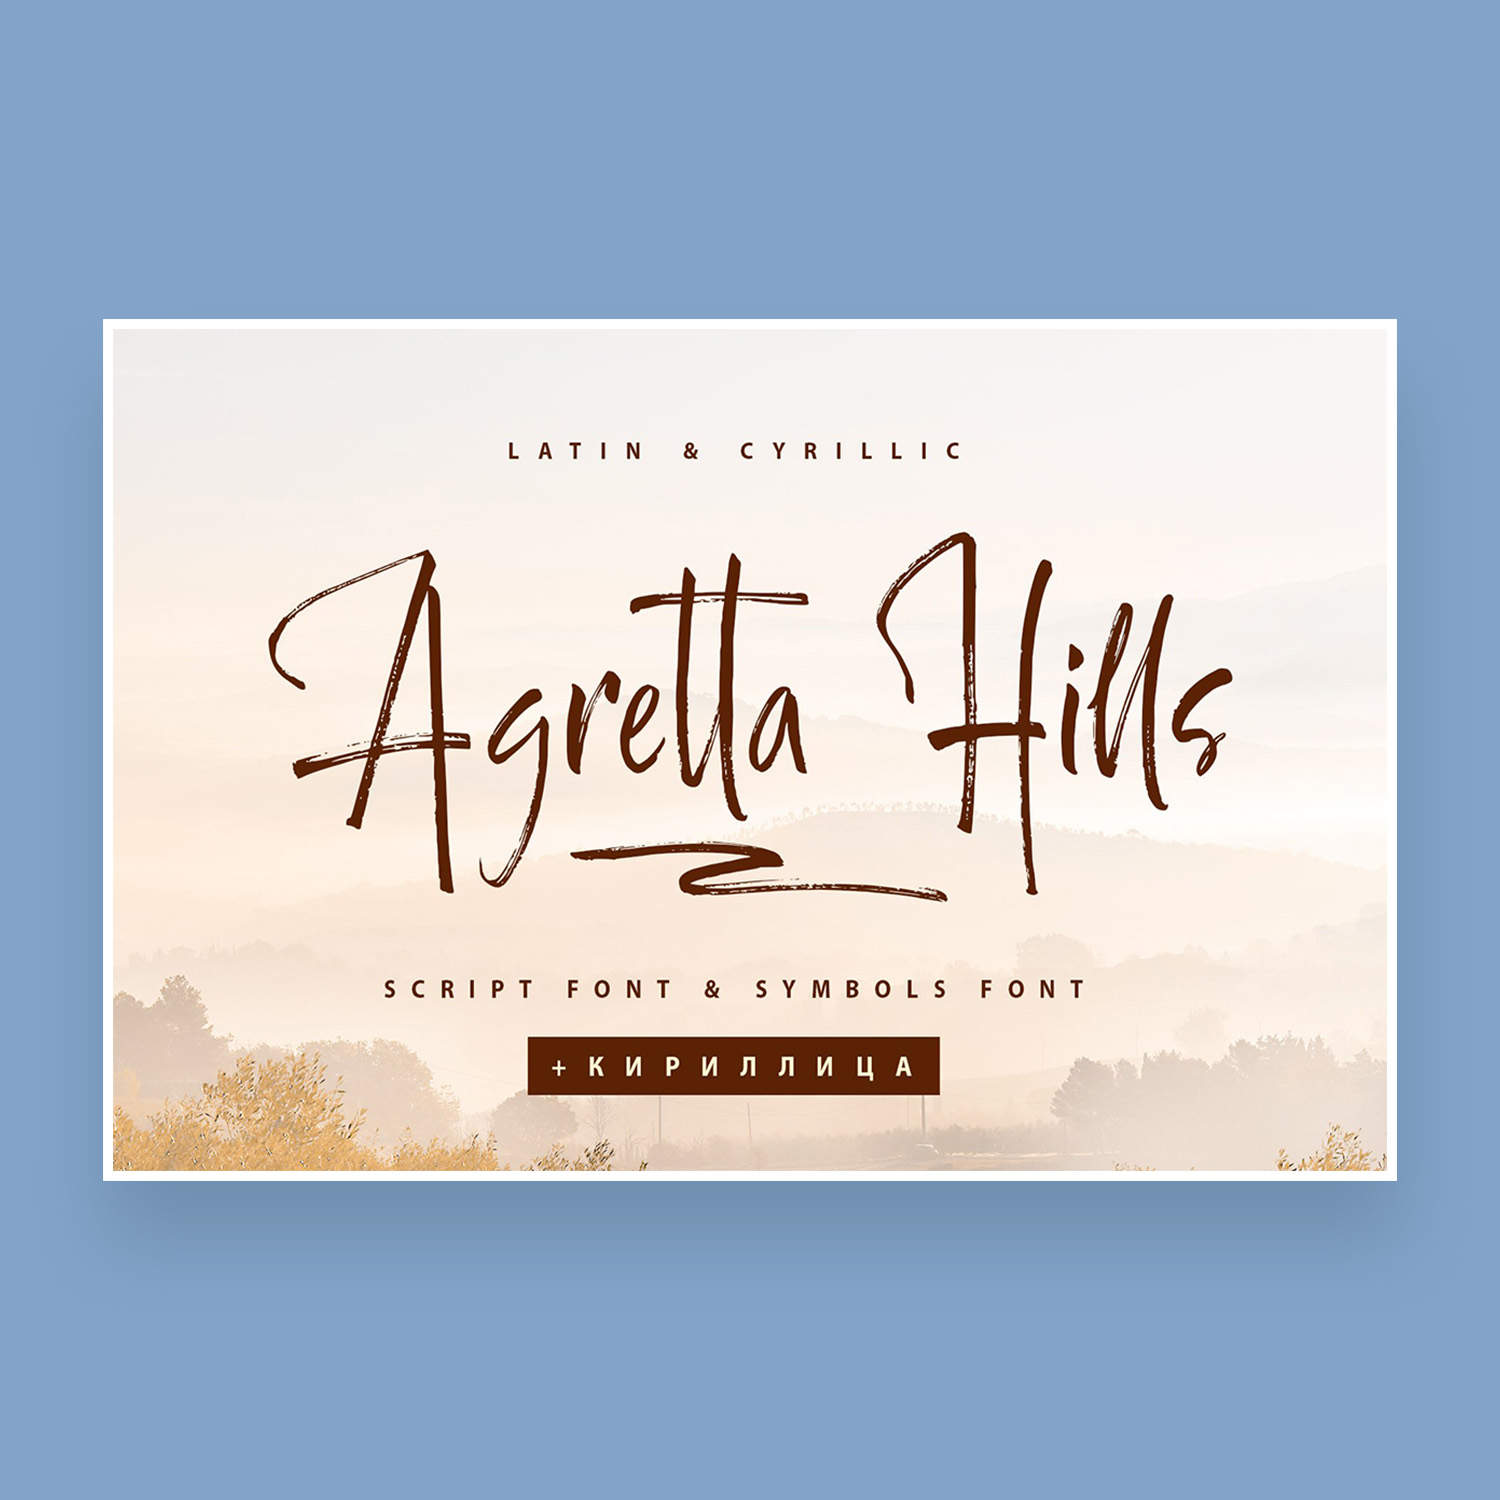 Agretta Hills Cyrillic Textured Font Cover Image.